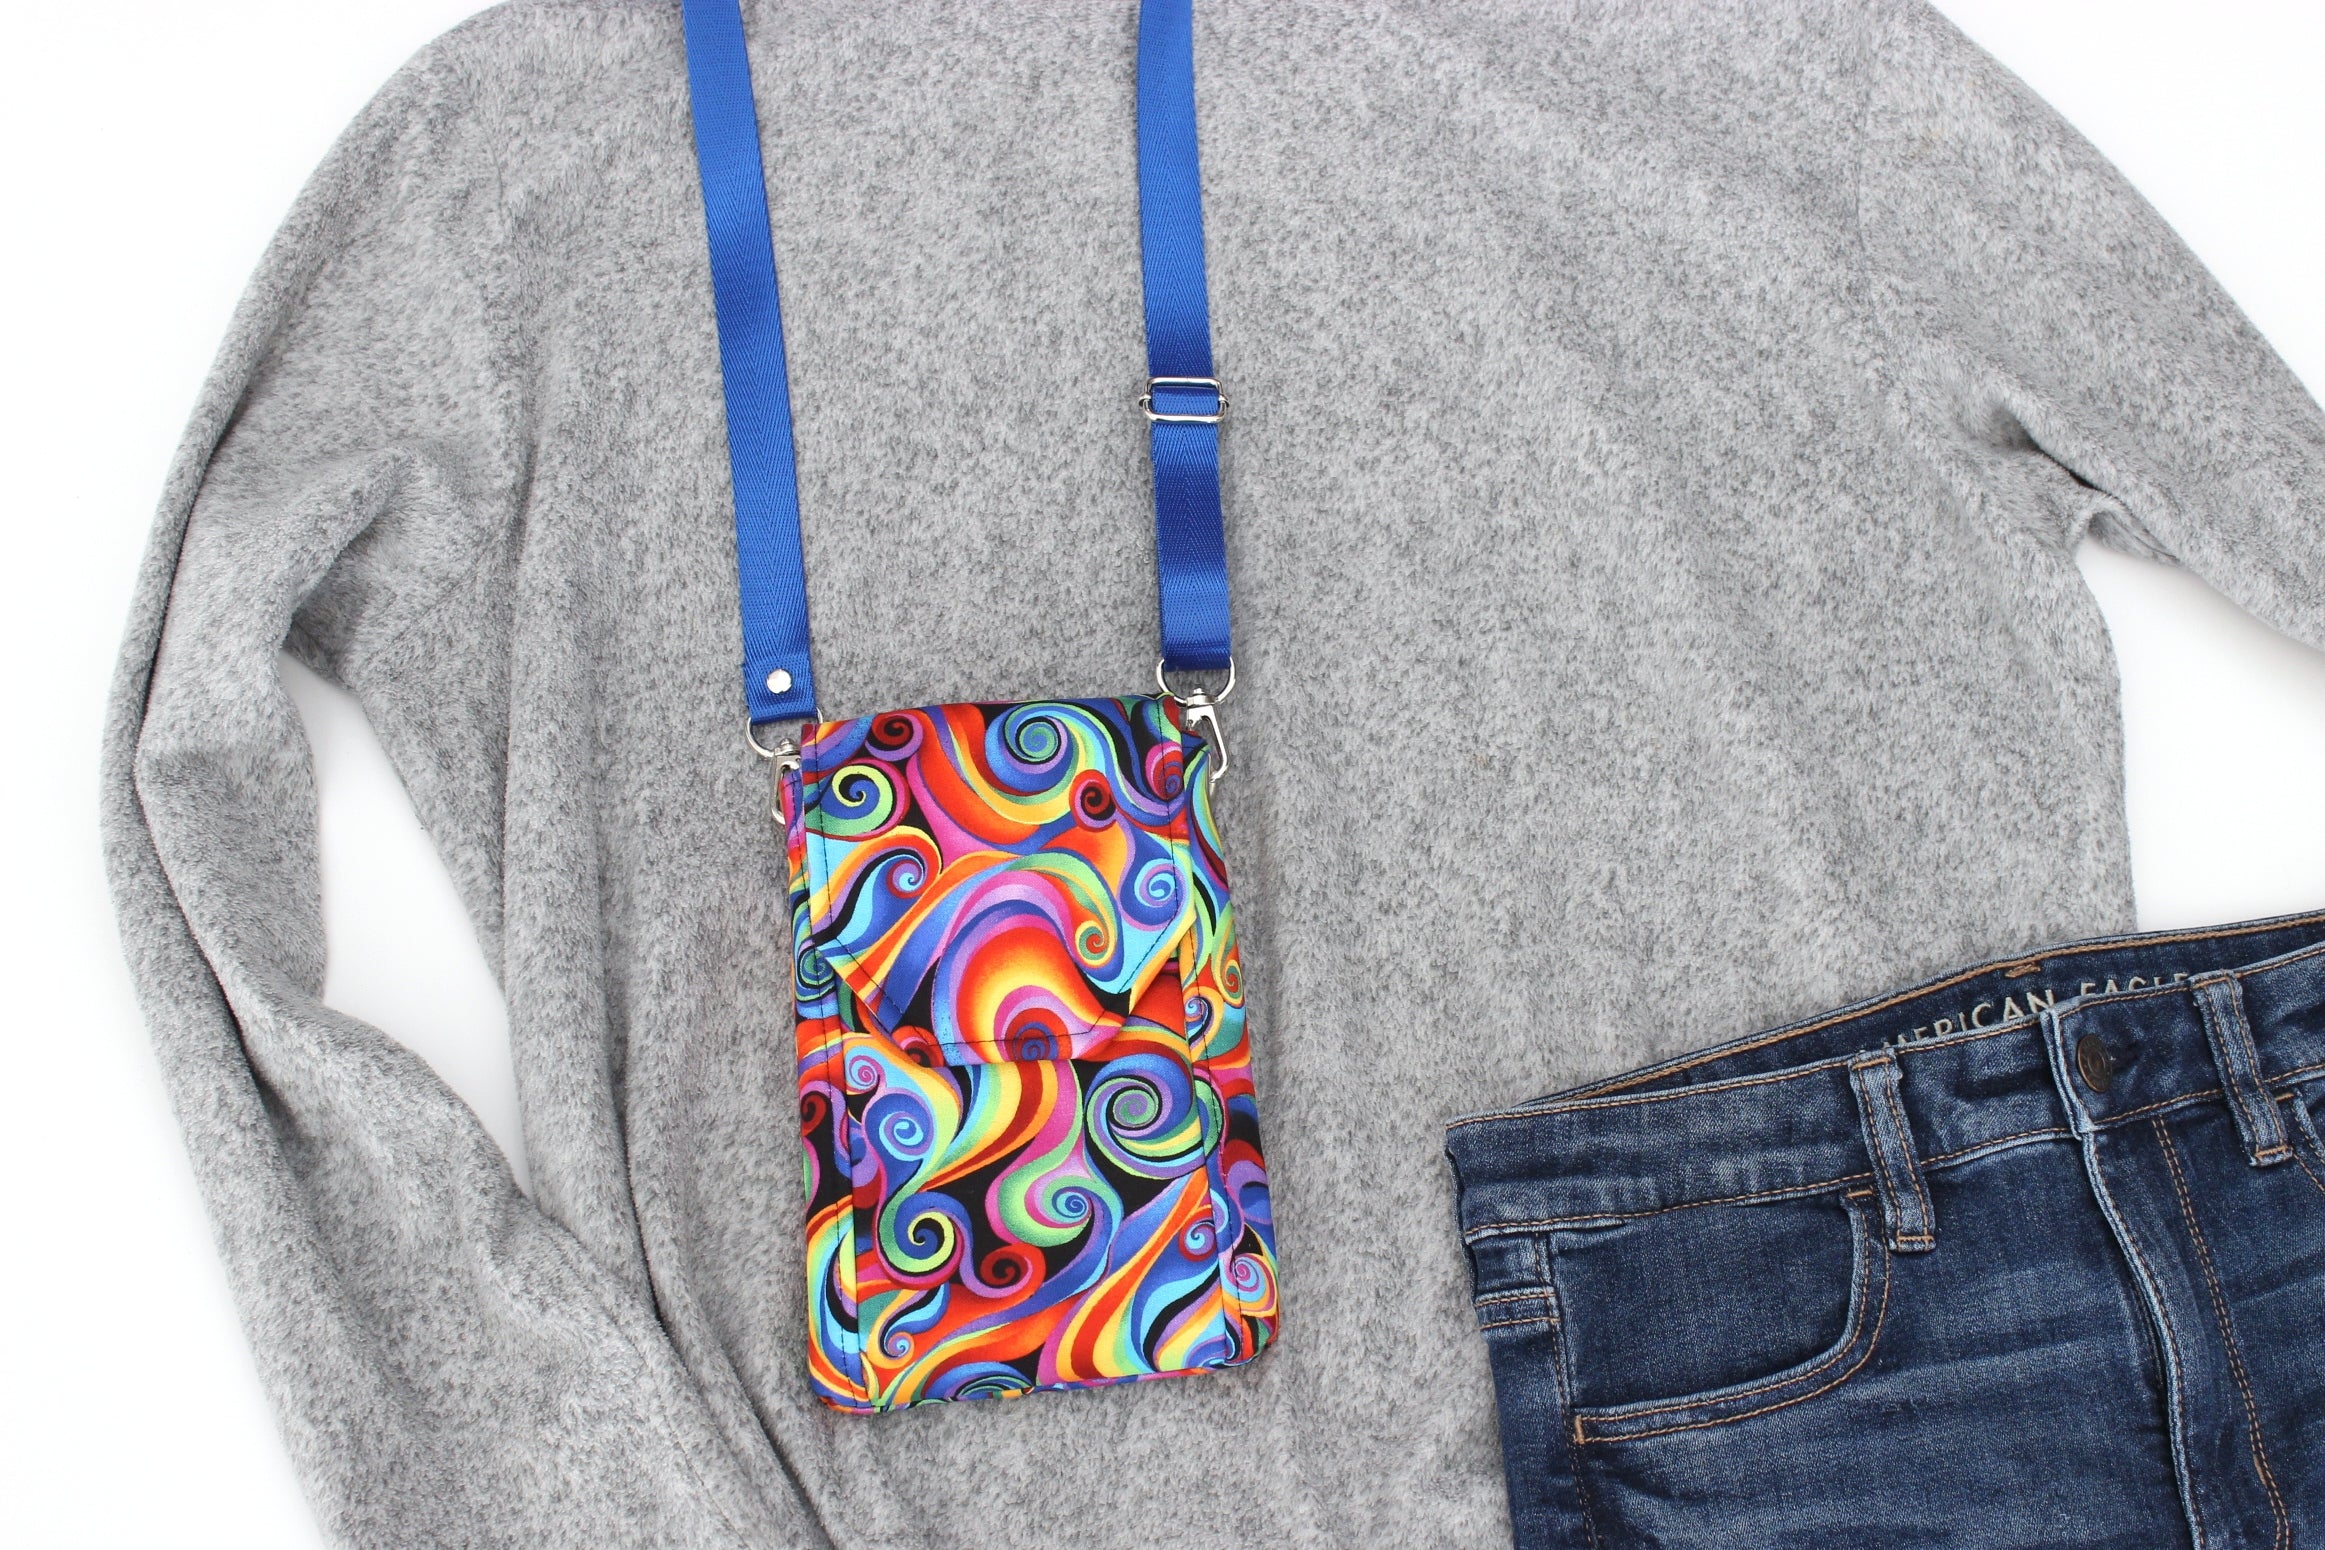 Cross body cell phone purse - colorful spiral shell fabric phone bag